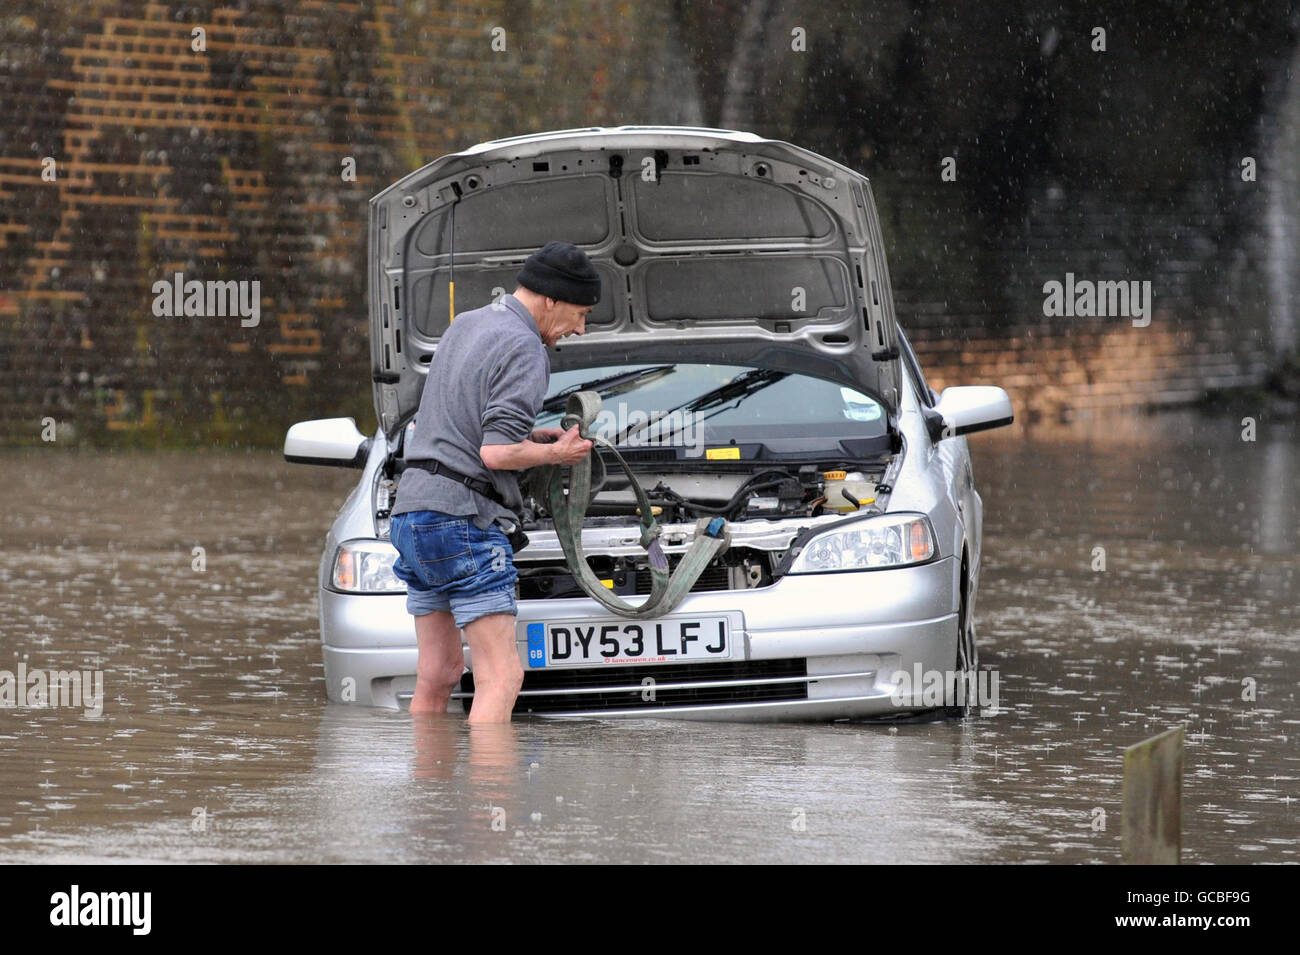 A driver is towed out of deep water by police after getting stuck on a flooded road in Essex. Stock Photo